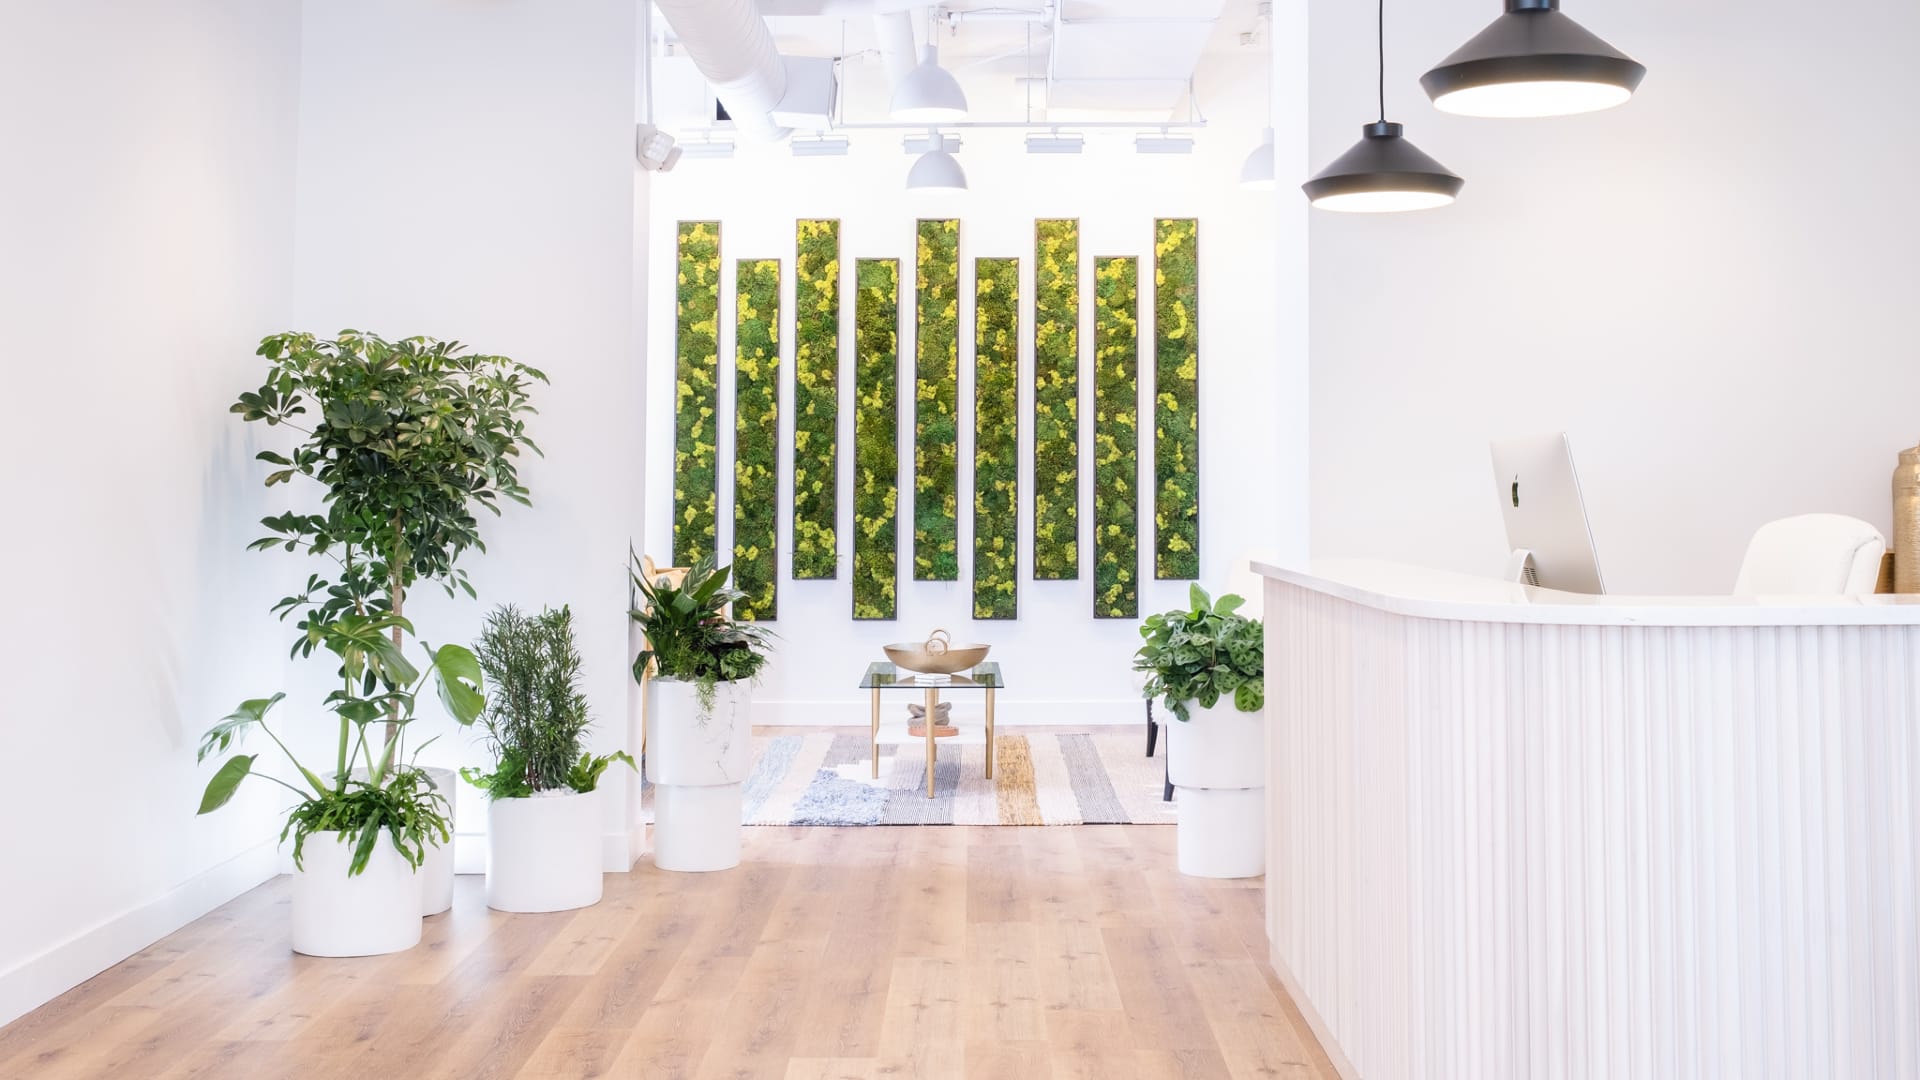 A reception room that is mostly white, with rectangular greenery panels on the wall.